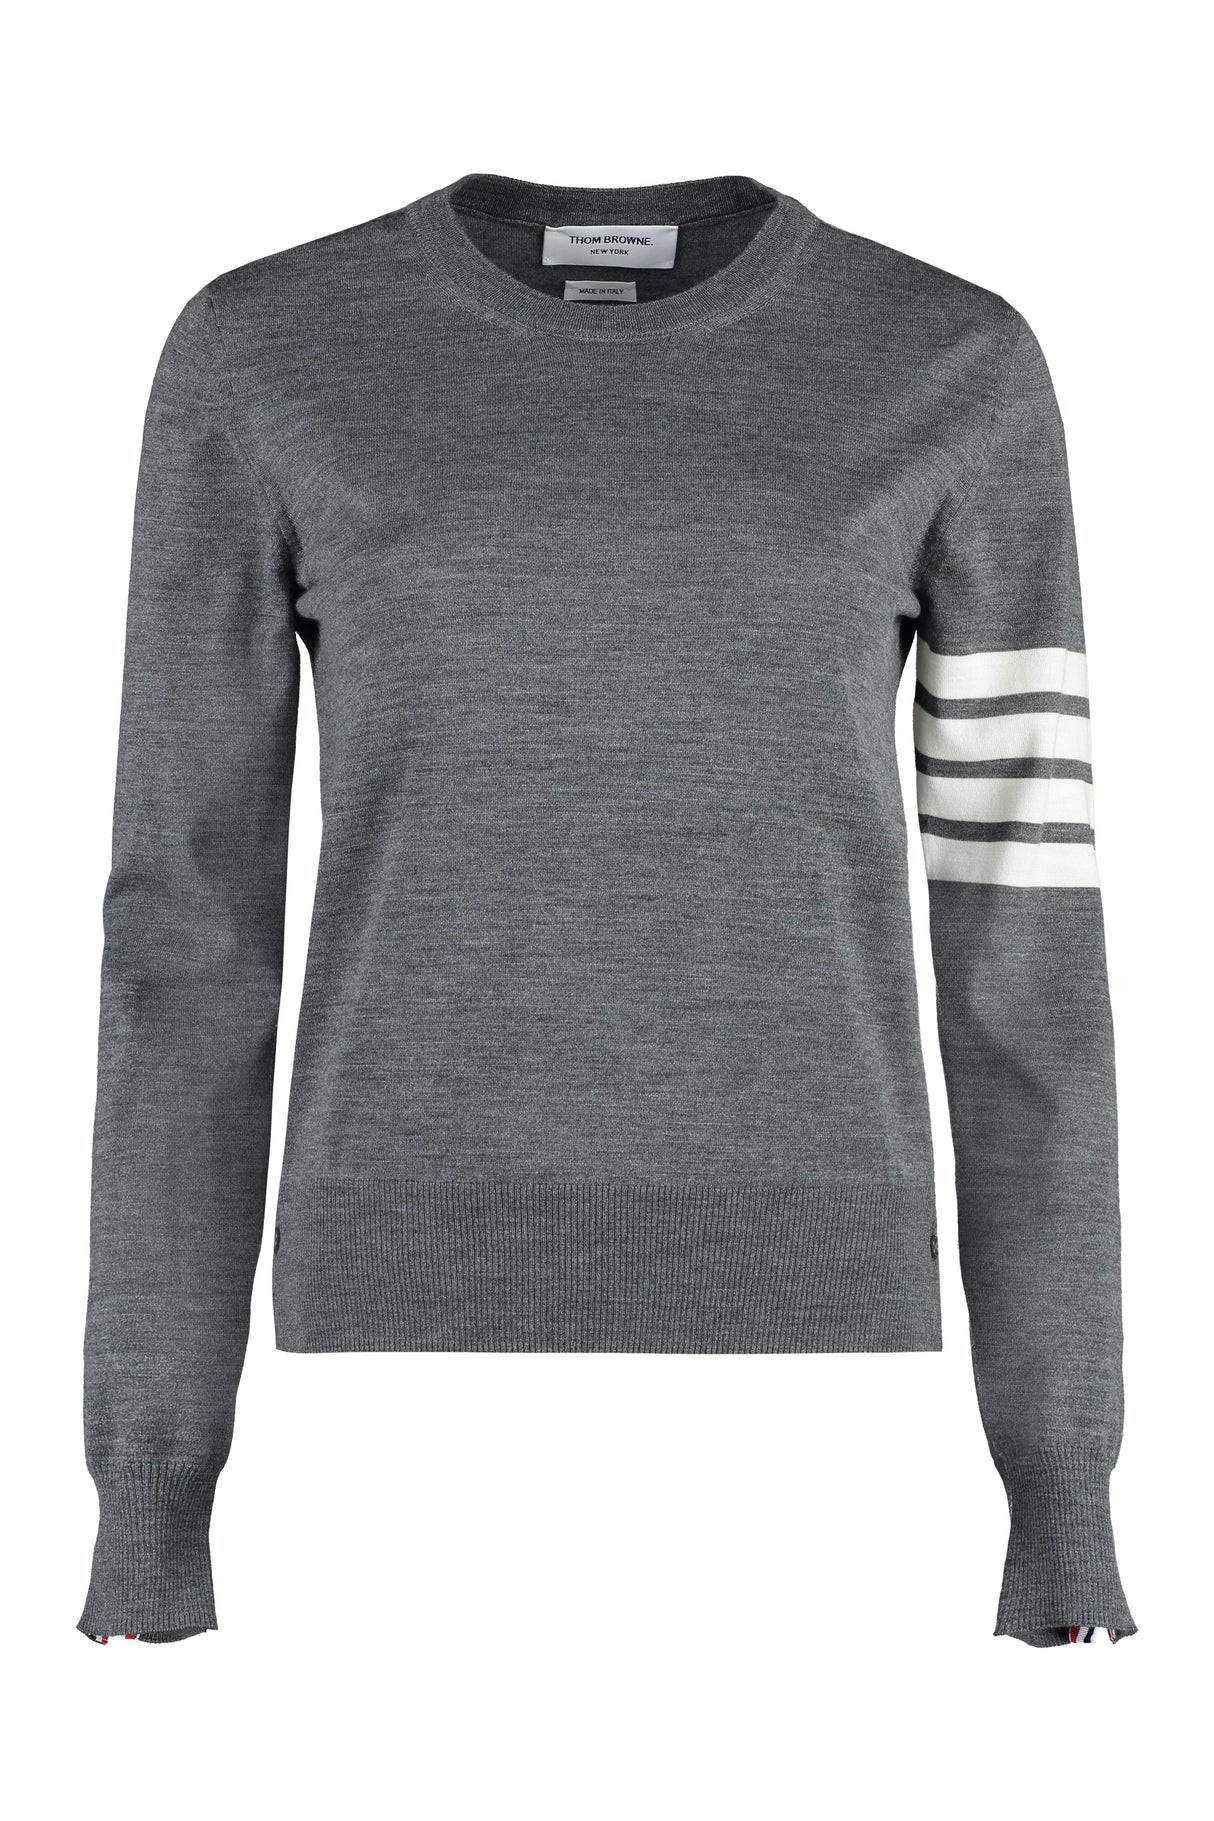 Women's Grey Knit Sweater - SS24 Collection